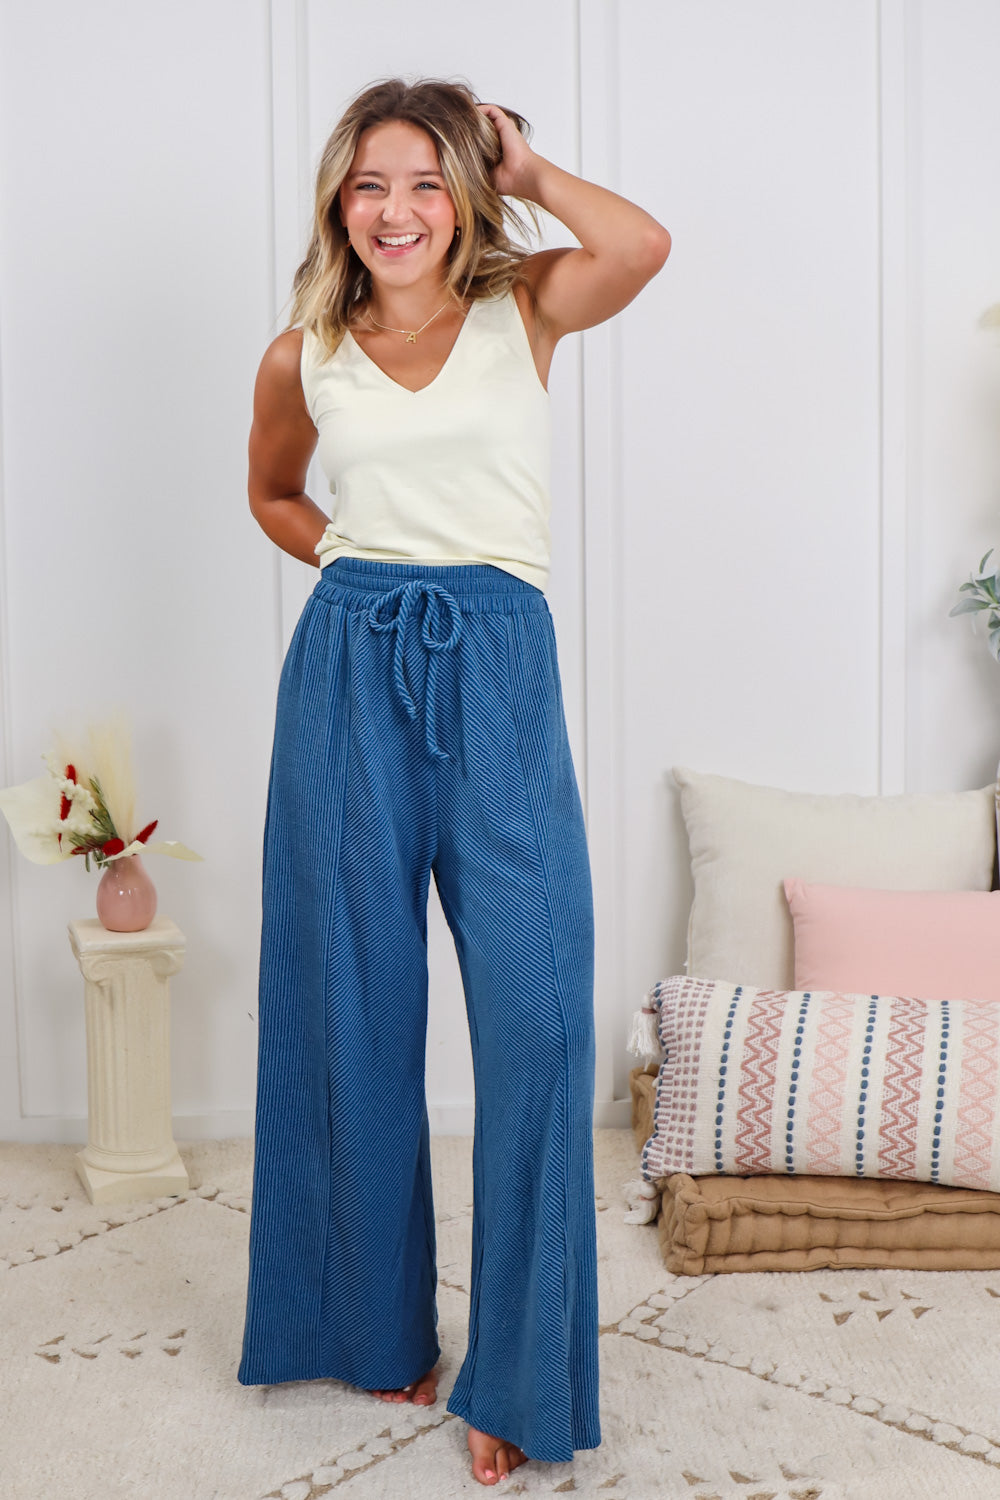 Intimately Downtime Wide Leg Pants